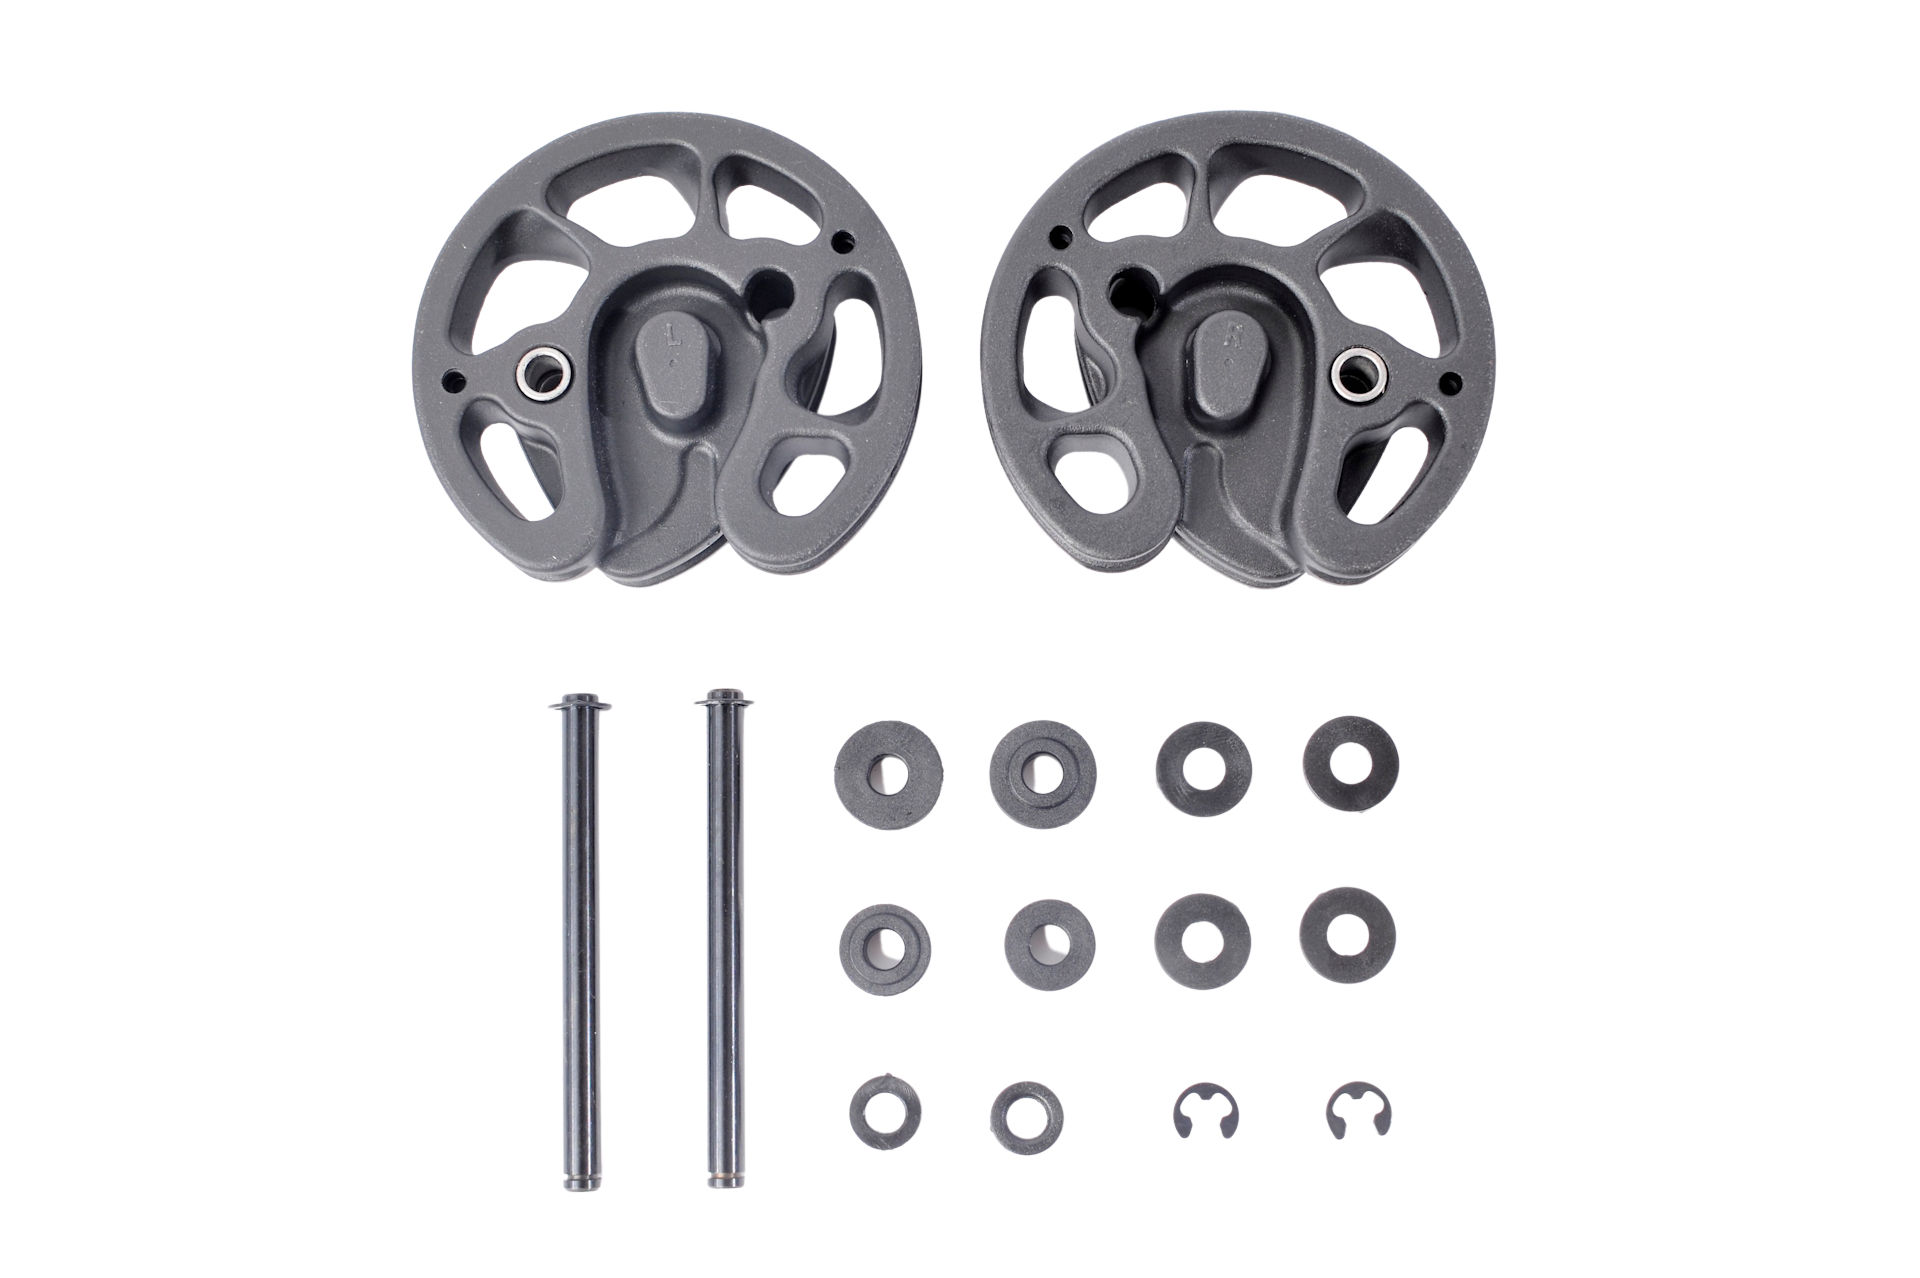 Cam Set for Crossbow Hex 400, set of two